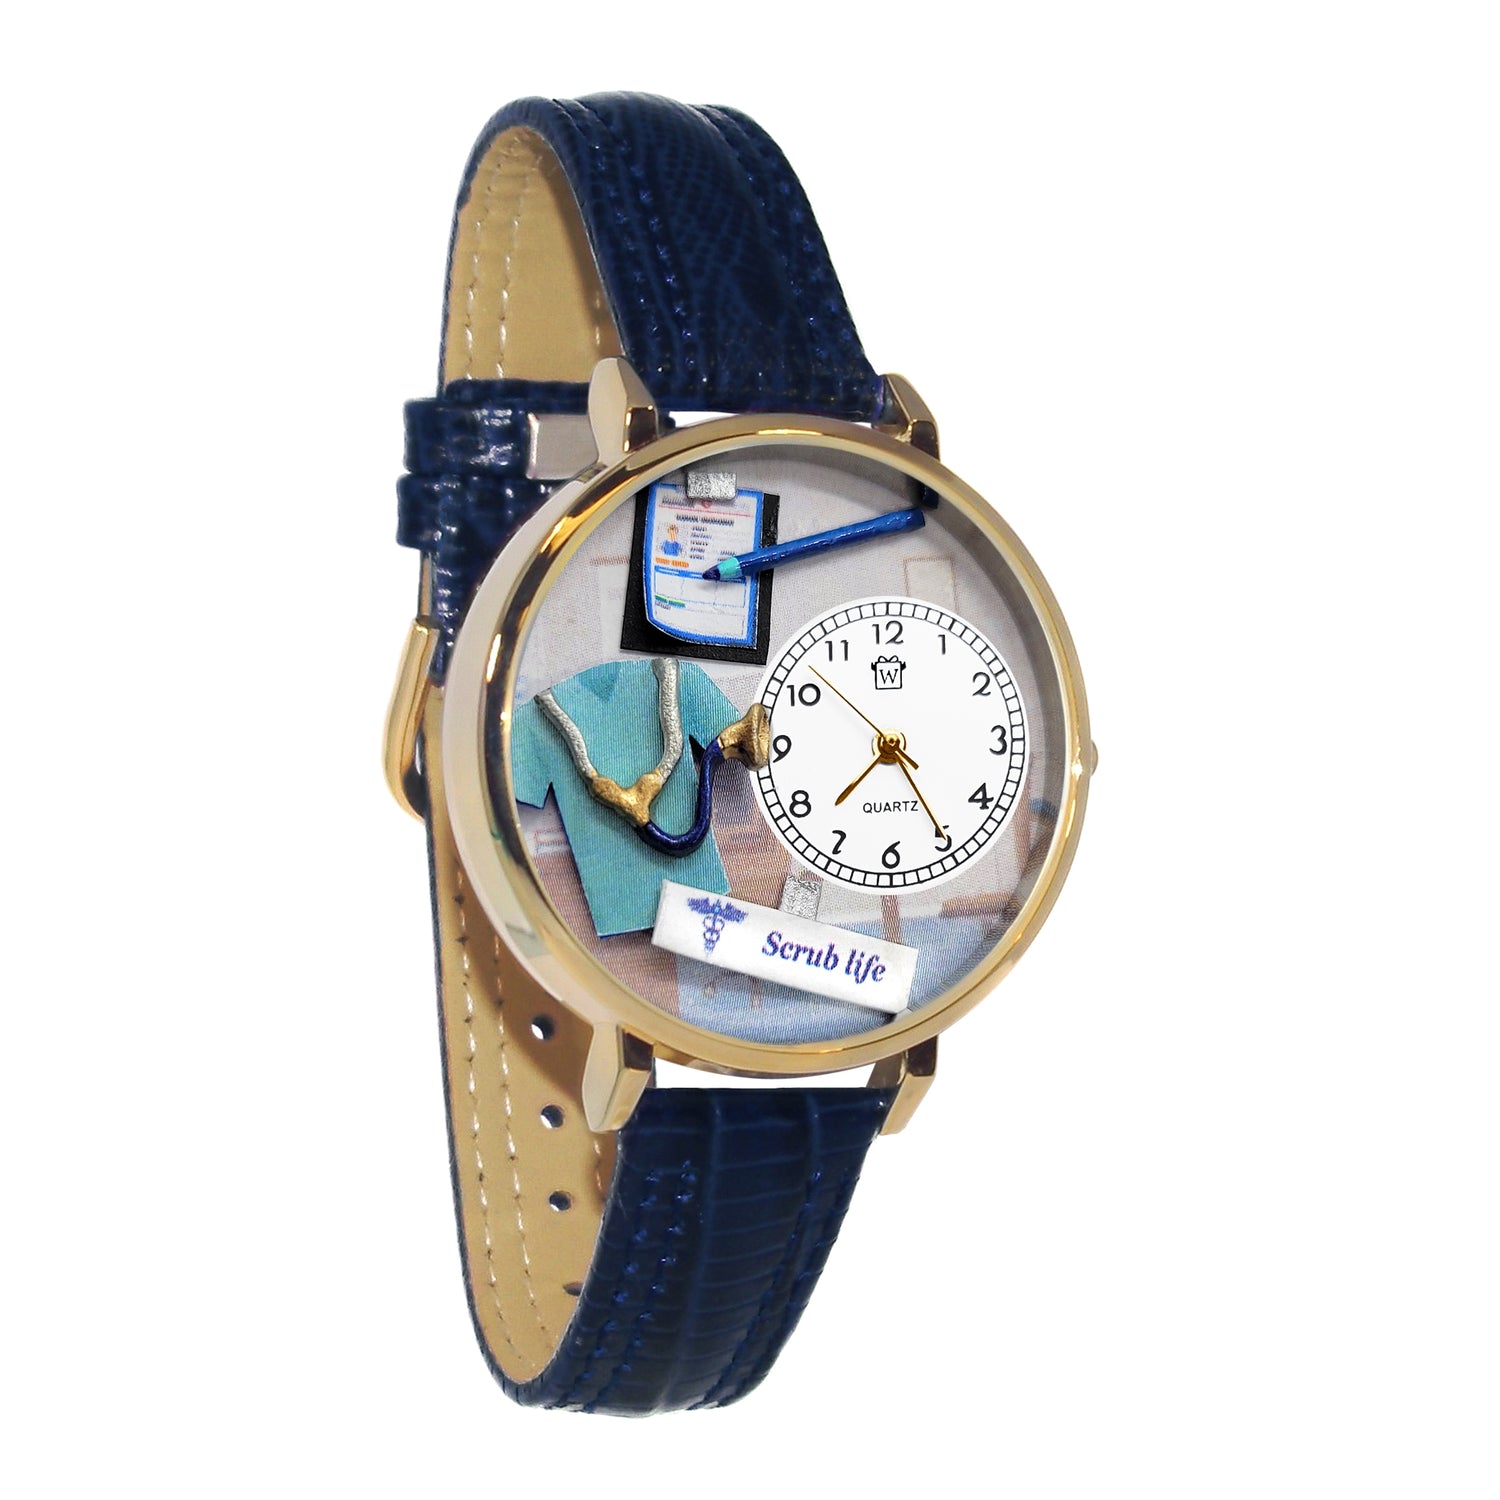 Whimsical Gifts | Scrub Life 3D Watch Large Style | Handmade in USA | Professions Themed | Medical Professions | Novelty Unique Fun Miniatures Gift | Silver Finish Navy Blue Leather Watch Band